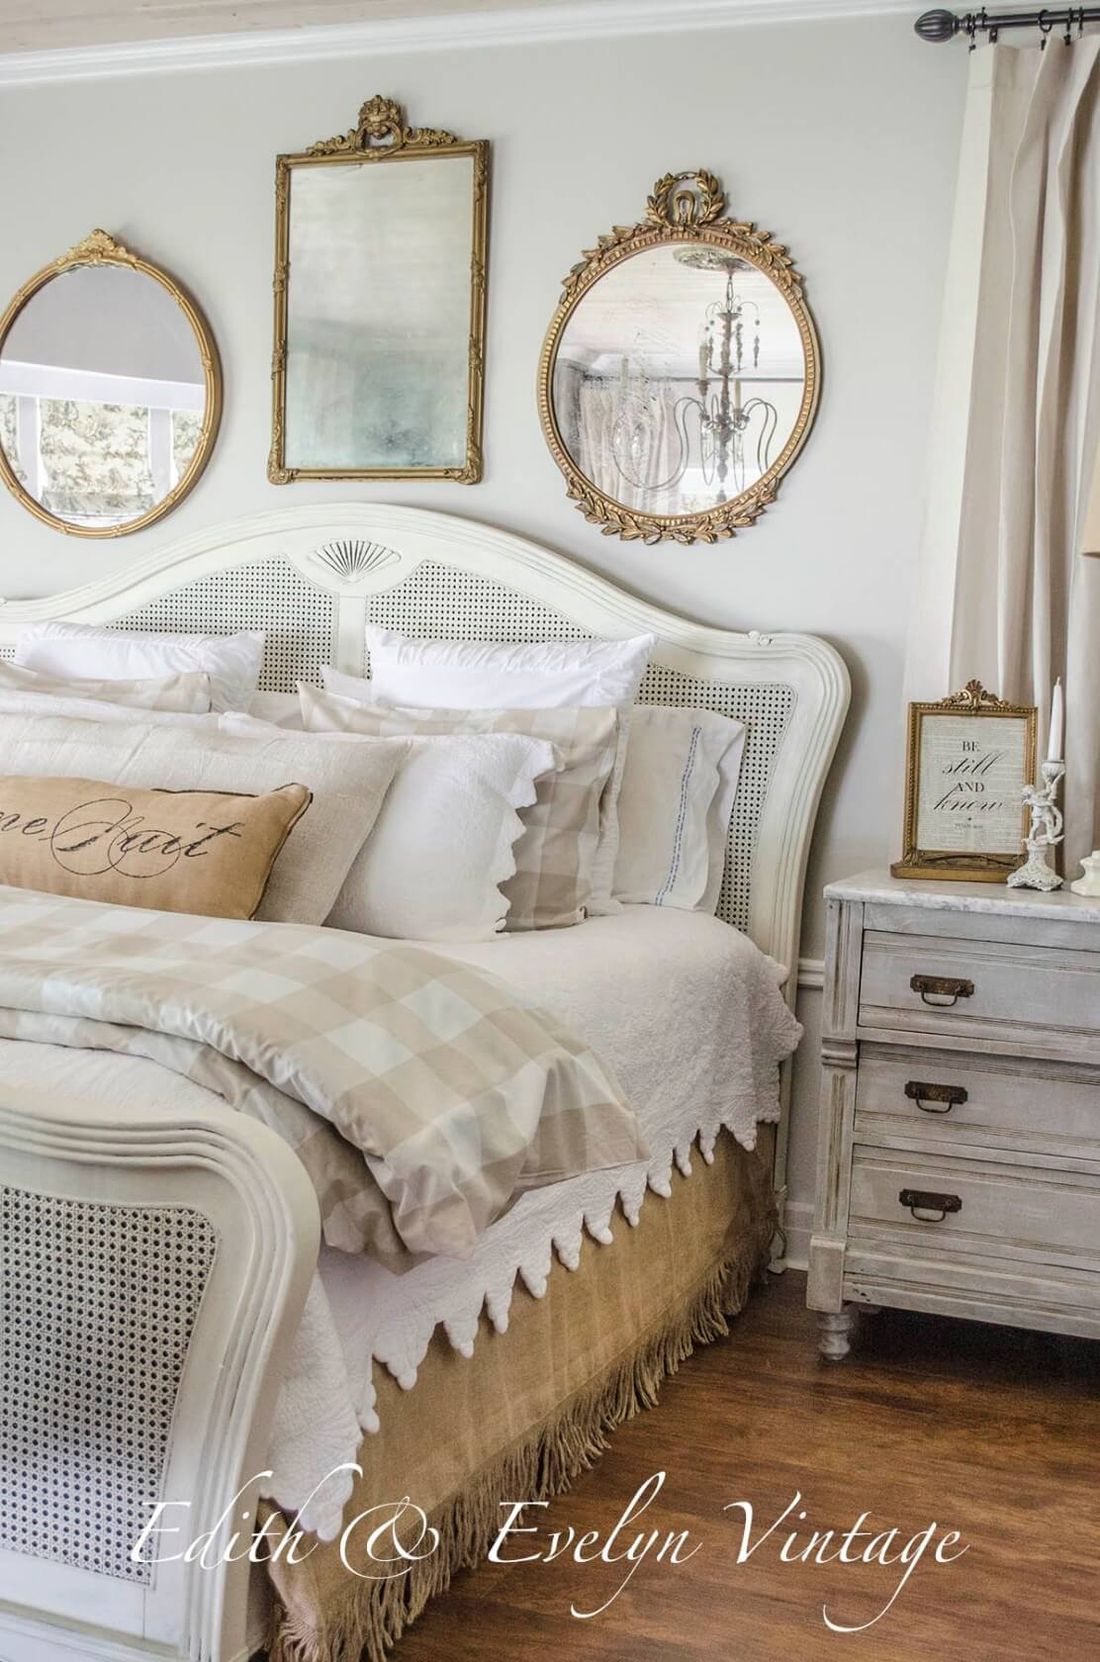 French country bedroom with Gold mirrors on the wall via Edith Evelyn Vintage